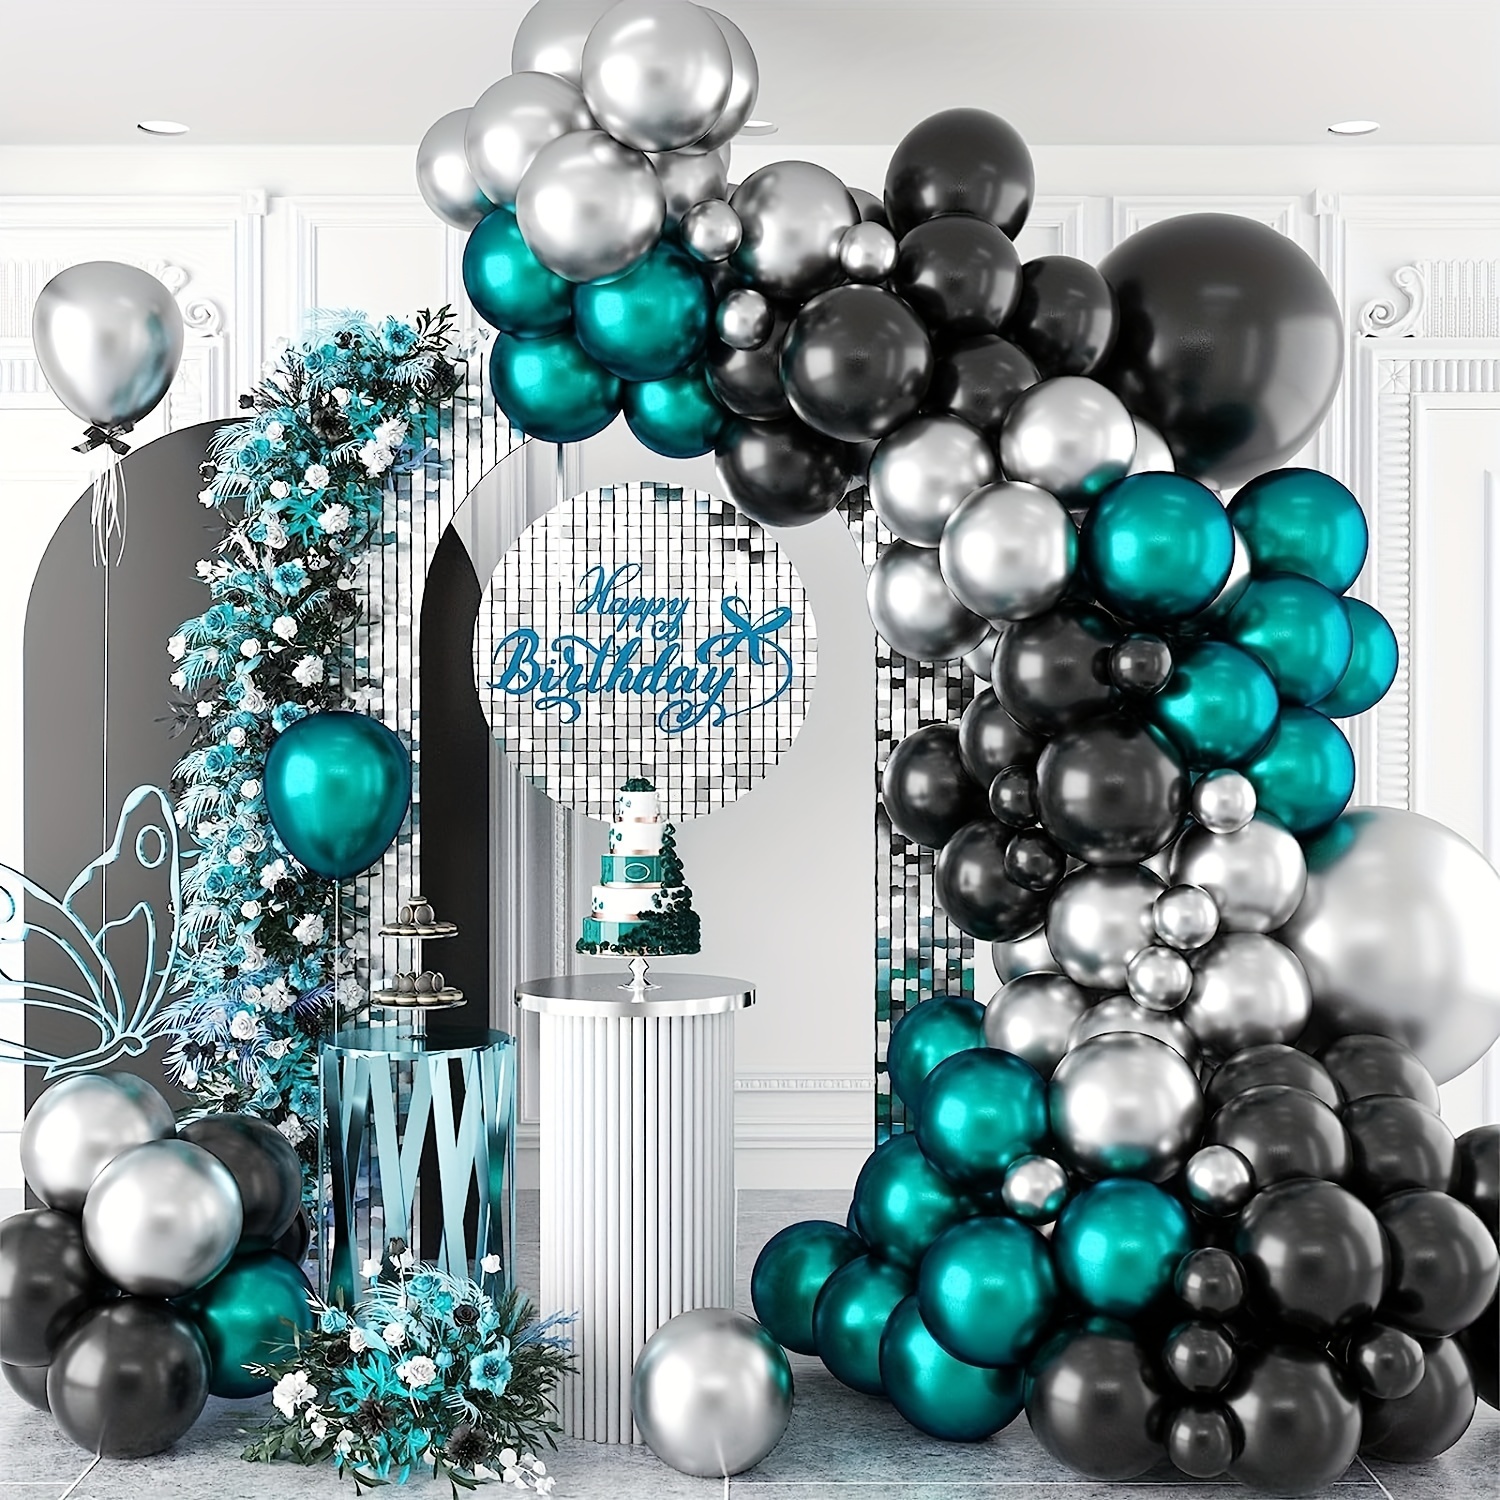 

88pcs Teal Blue Balloon Arch Kit Different Size 5 10 18 Inch Birthday Party Balloons Metallic Silvery Black Teal Blue Garland Kit Diy Latex Balloon Arch For Birthday Wedding Balloon Easter Gift